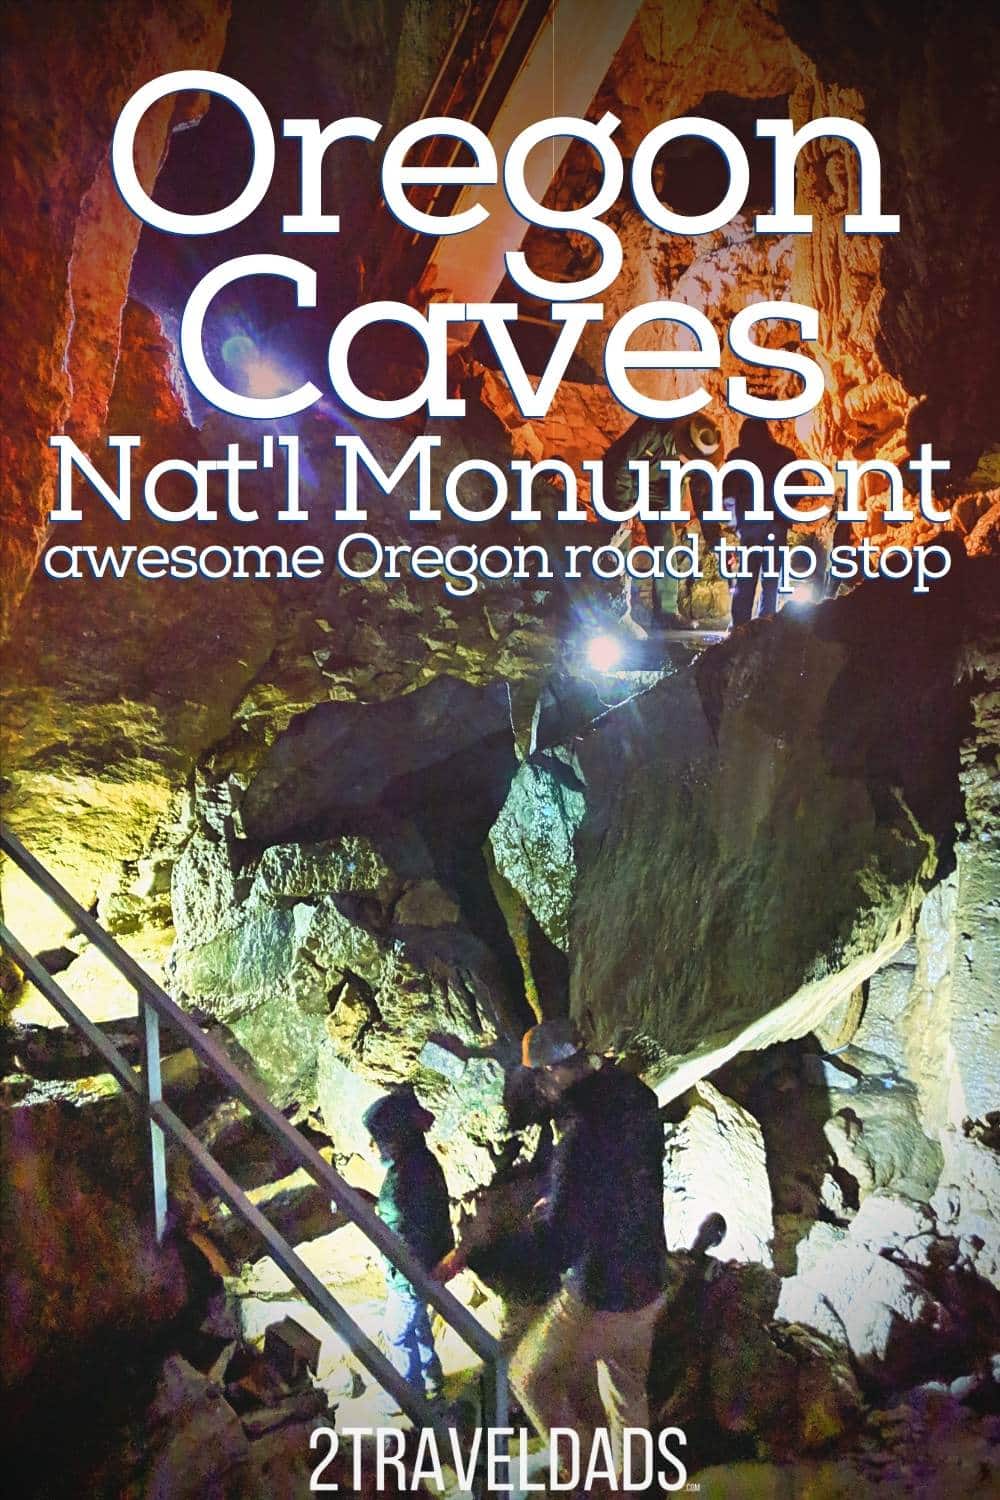 Everything you need to know to visit Oregon Caves National Monument, including cave tours, hiking trails and details of the Oregon Caves Chateau. Cave Junction, OR is worth the drive for this fascinating road trip stop!